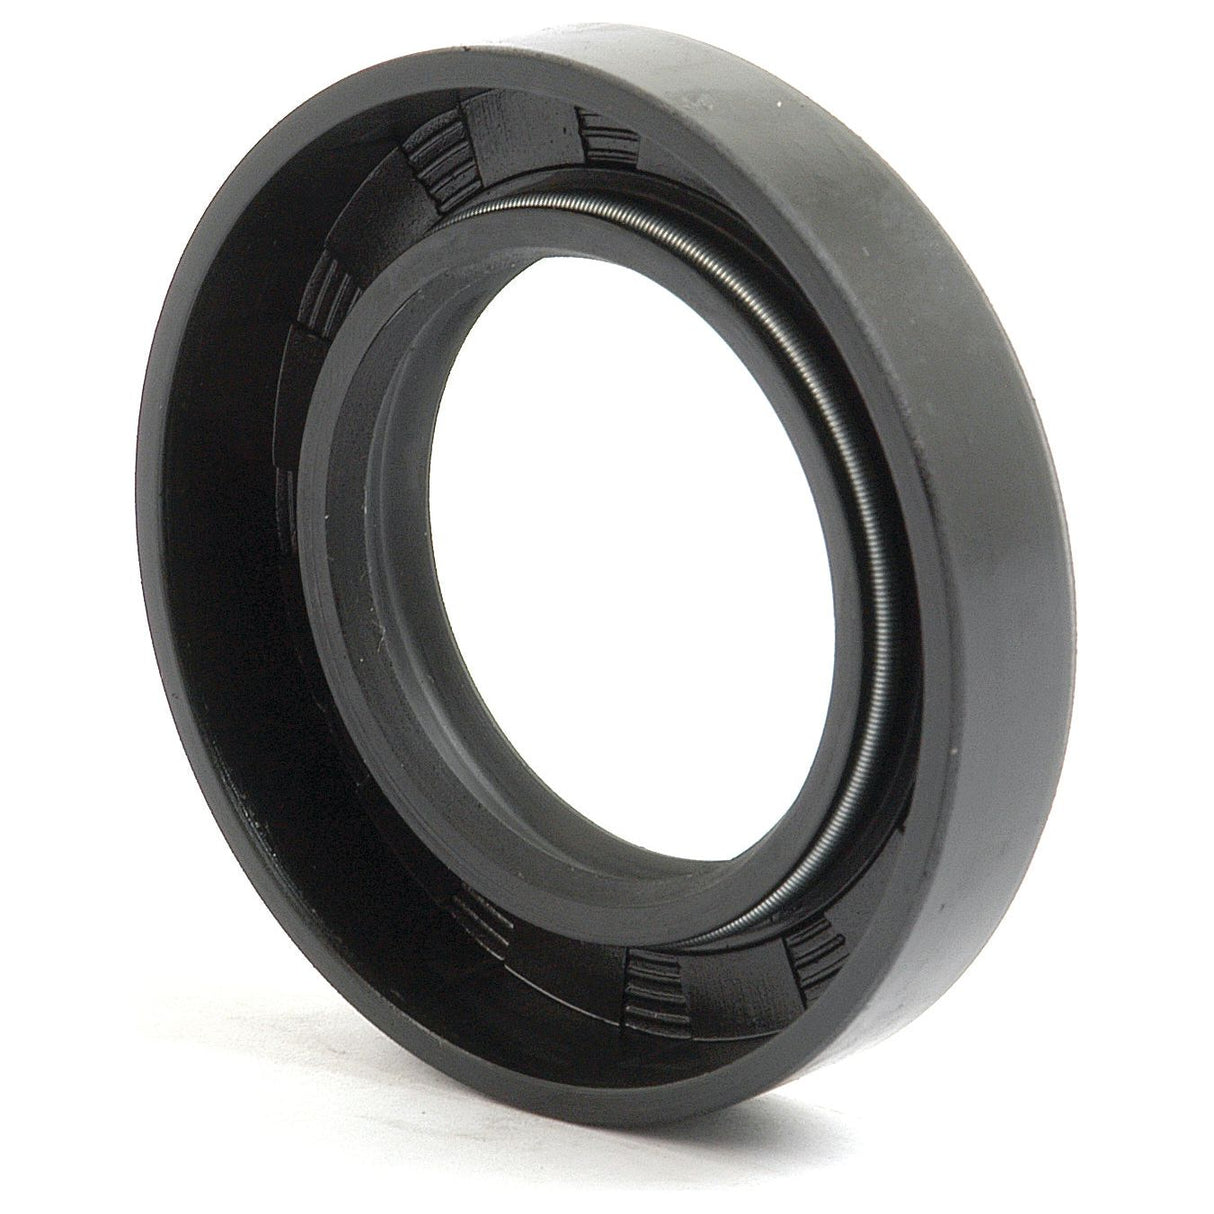 Imperial Rotary Shaft Seal, 1 1/2" x 2 1/2" x 1/2" Double Lip - S.65360 - Massey Tractor Parts